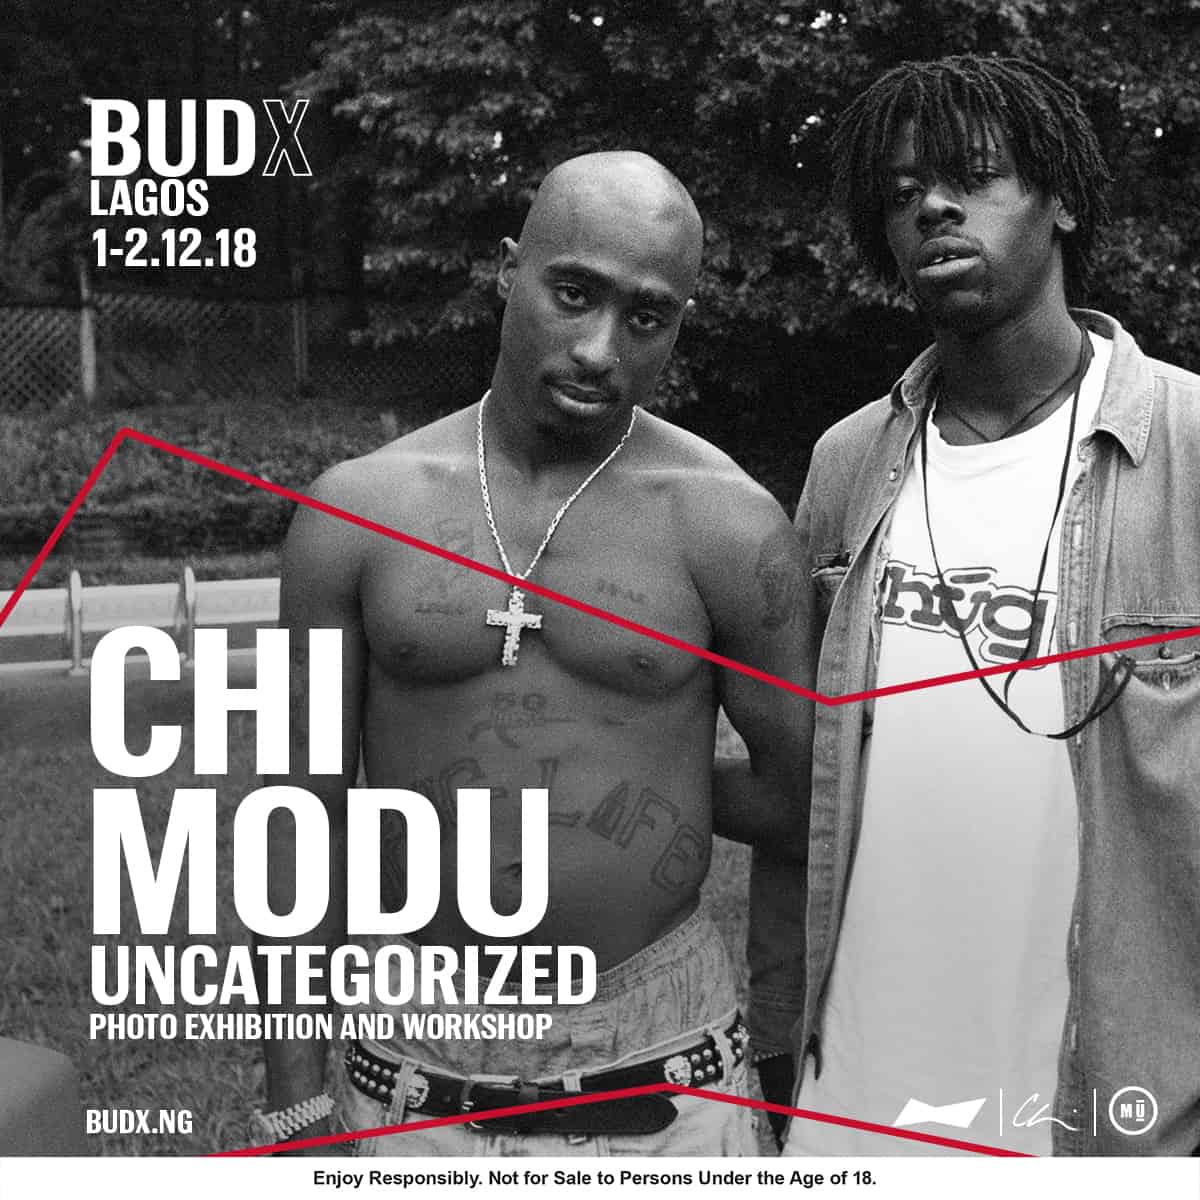 BUDx is hosting Chi Modu for his first photo exhibition in Lagos